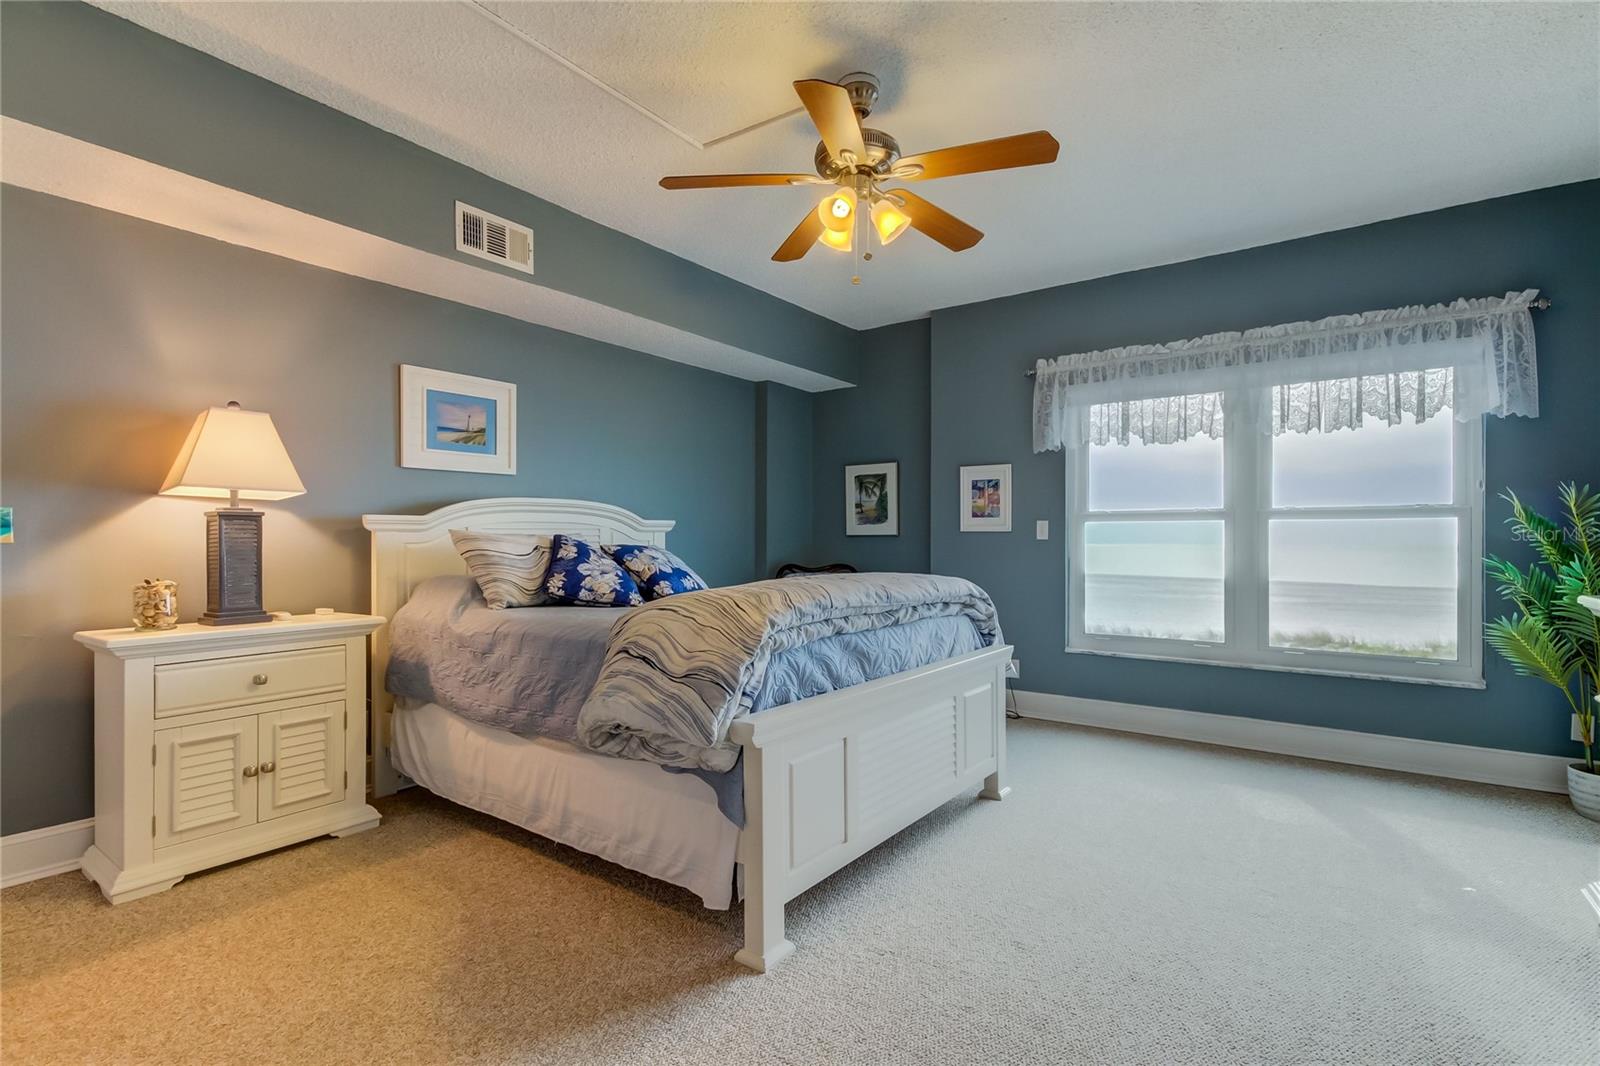 Master Bedroom with direct views of Gulf of Mexico